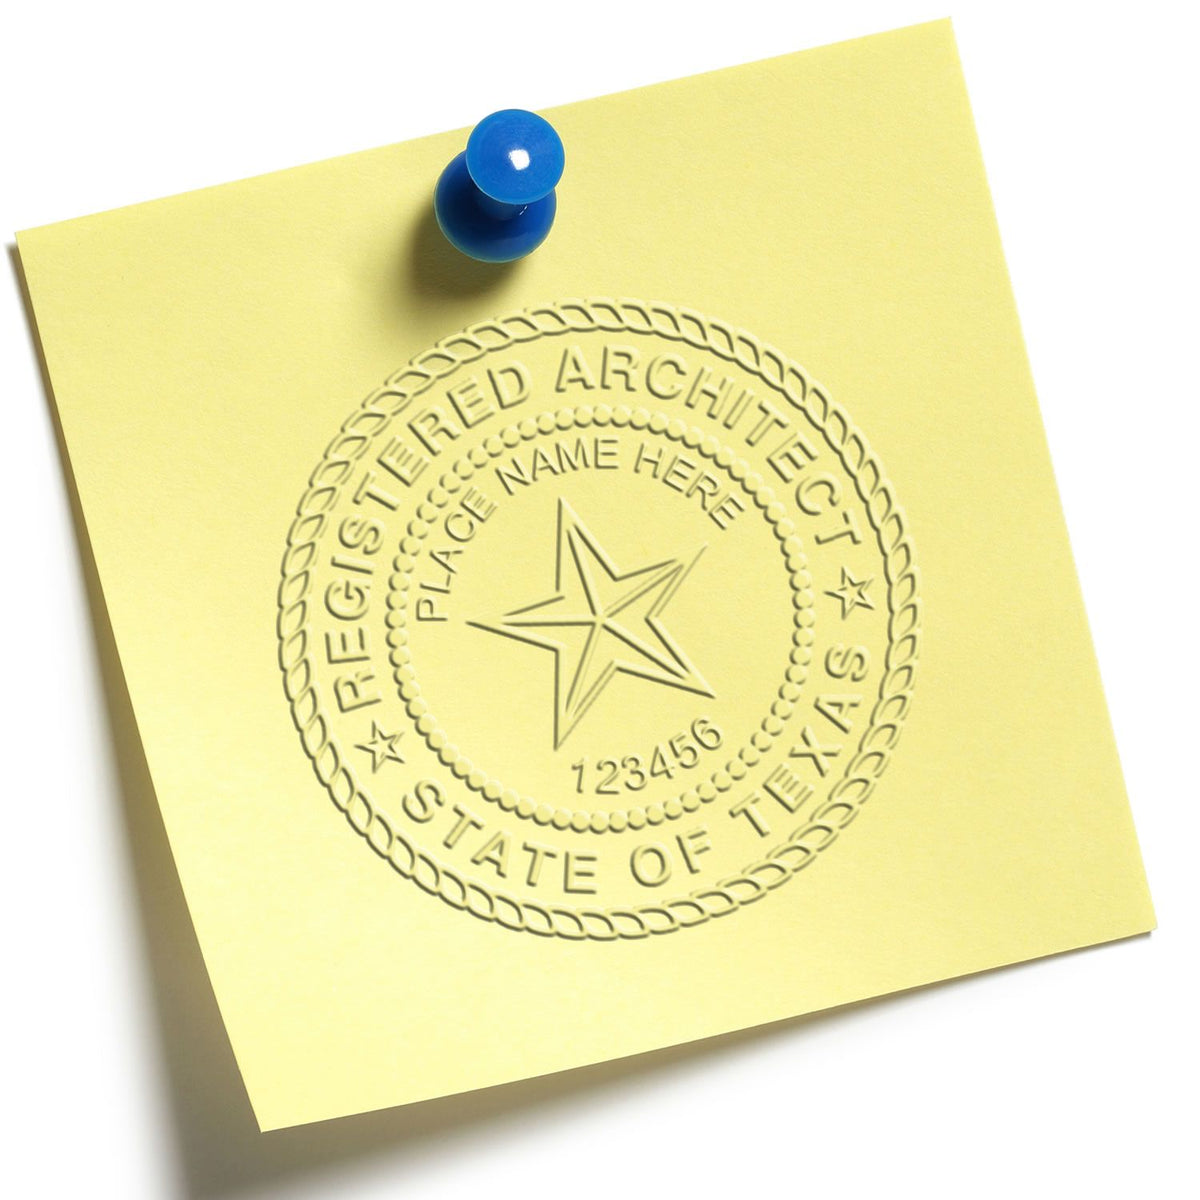 An alternative view of the Hybrid Texas Architect Seal stamped on a sheet of paper showing the image in use